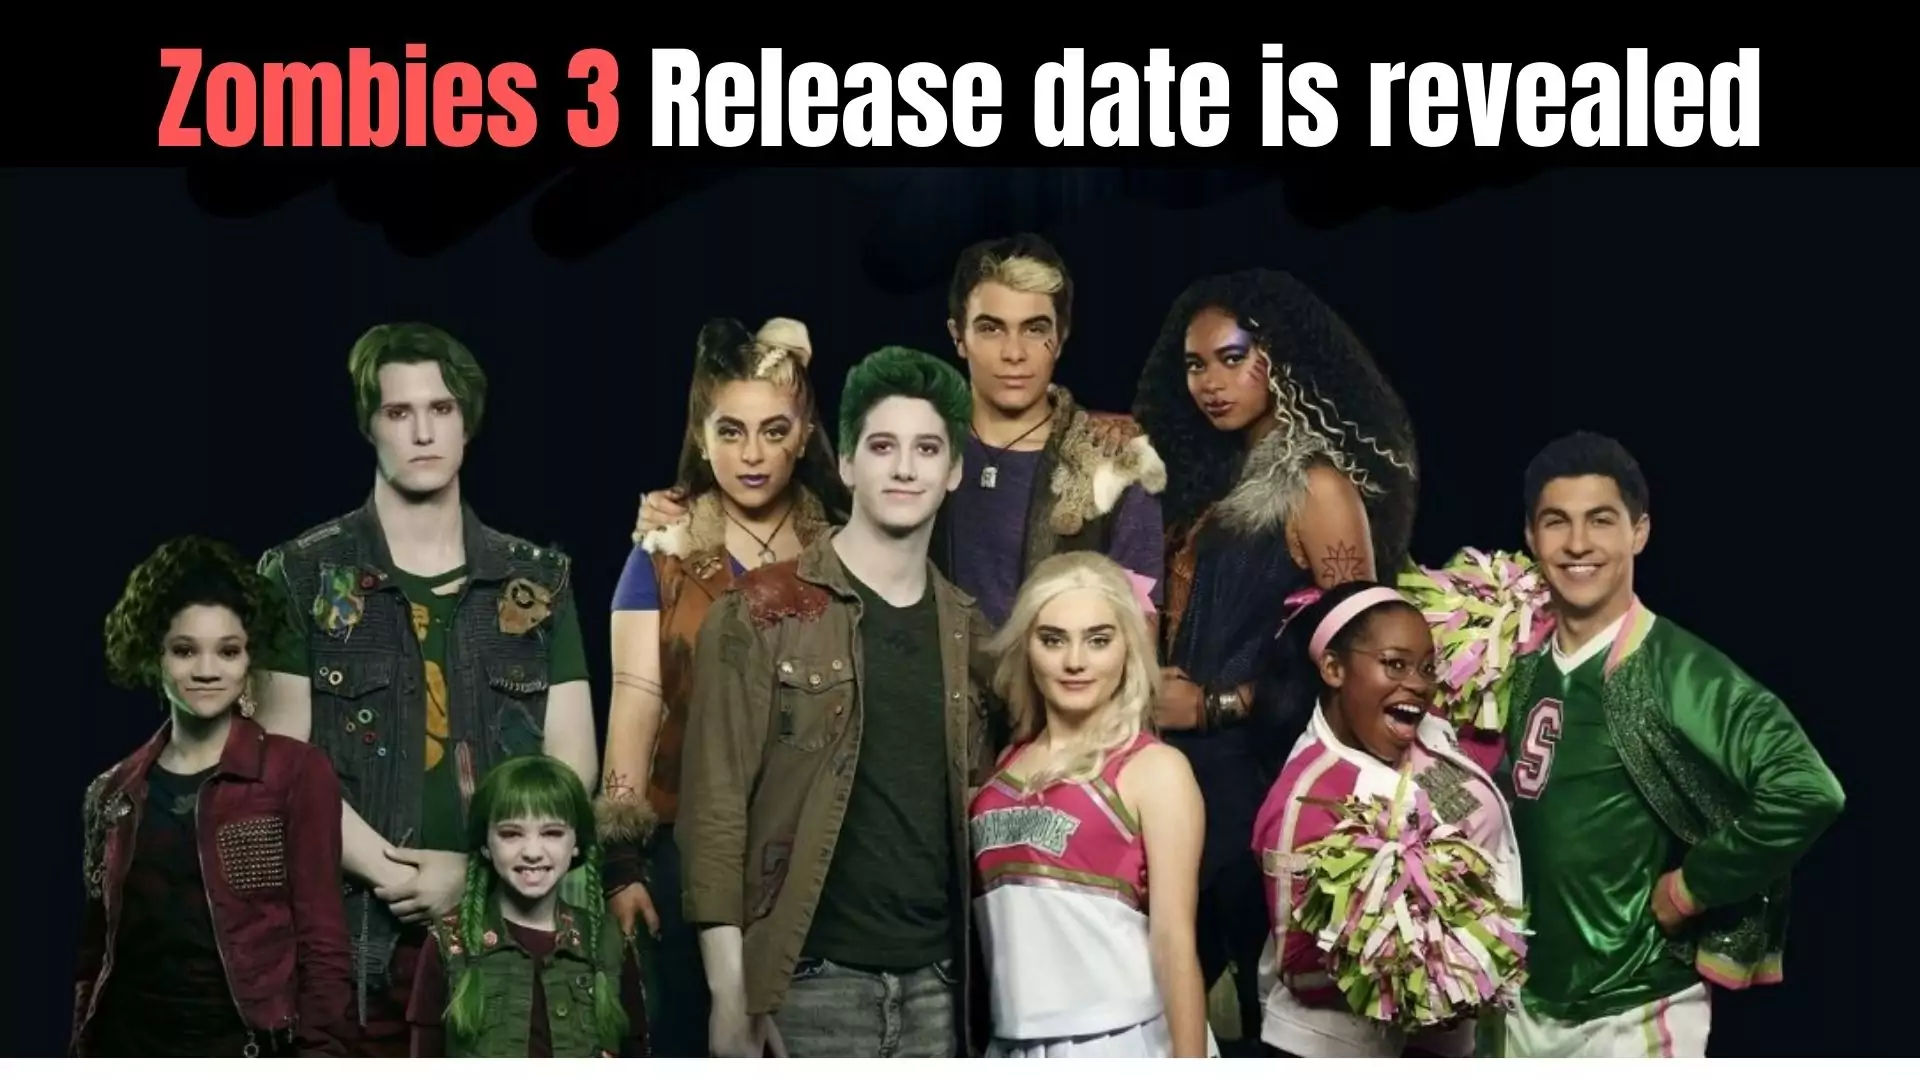 Zombies 3 Release date is revealed